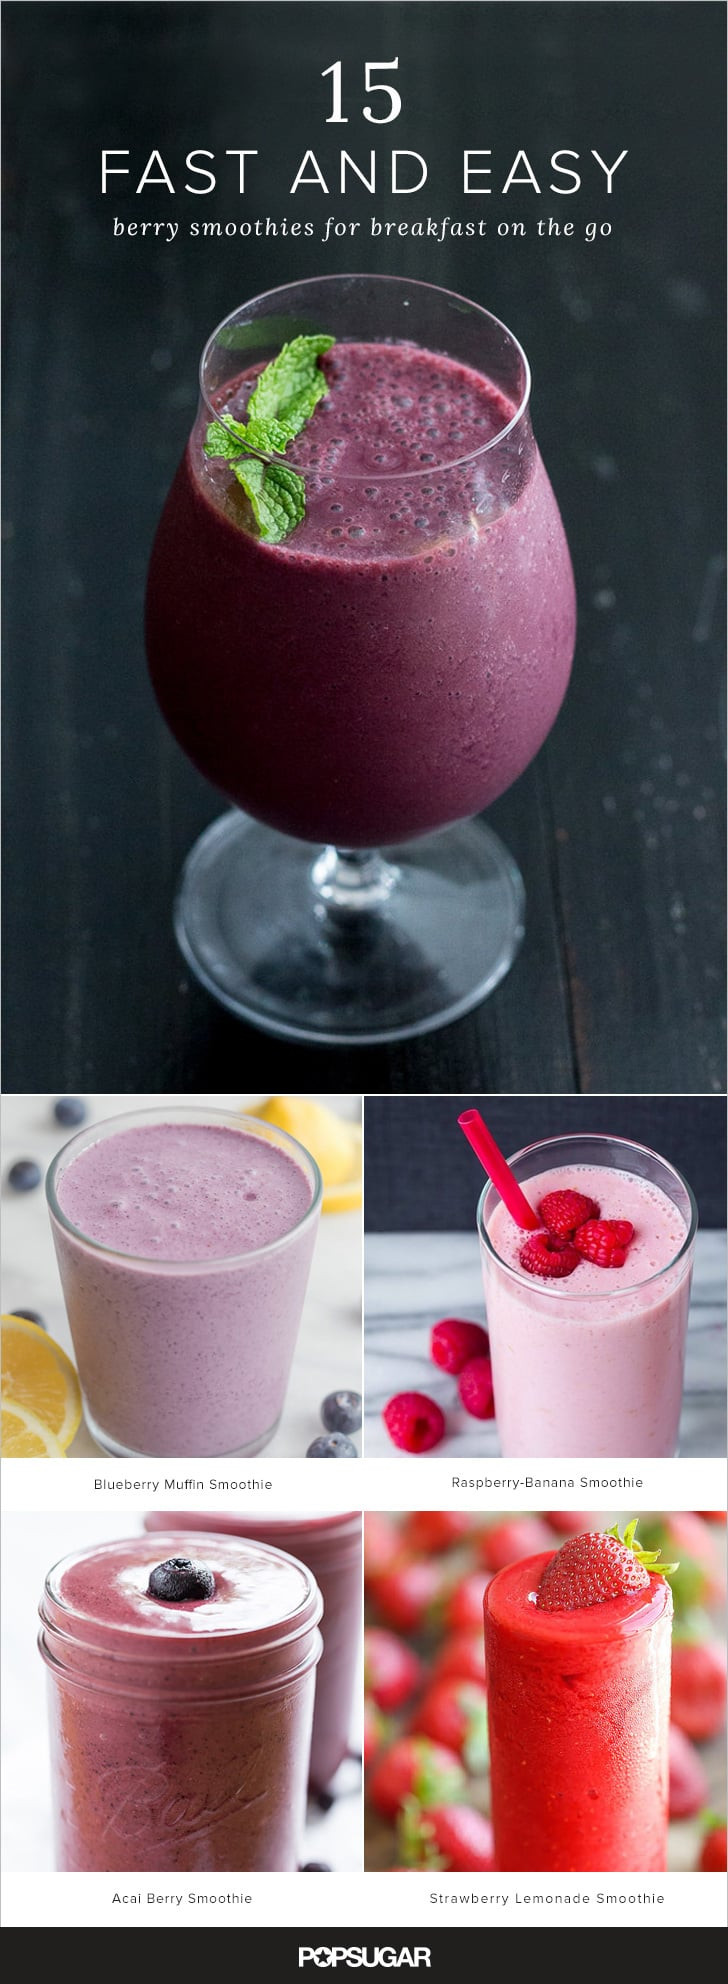 Best Fast Food Smoothies
 Fast and Easy Berry Smoothie Recipes